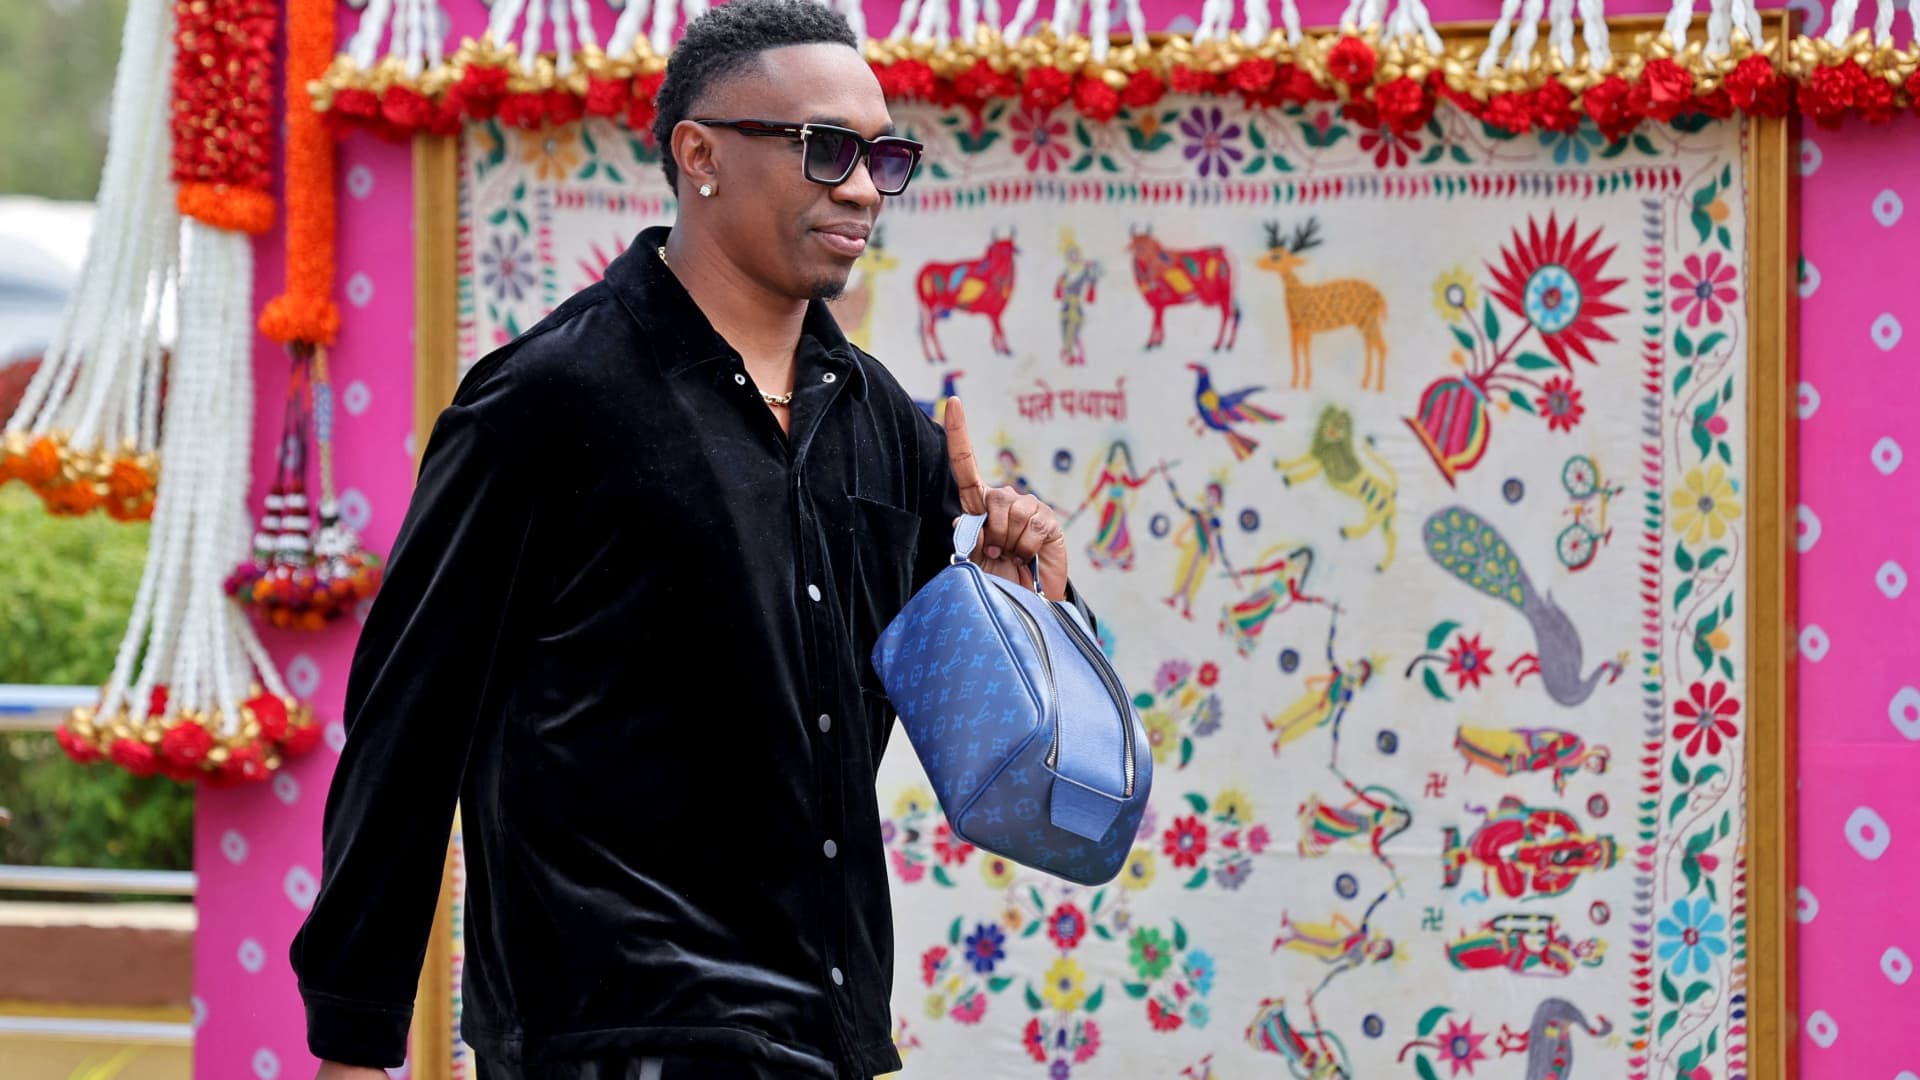 West Indies' cricketer Dwayne Bravo arrives to attend pre-wedding celebrations of Anant Ambani, son of Mukesh Ambani, and Radhika Merchant, daughter of industrialist Viren Merchant, at the airport in Jamnagar, Gujarat, India, on March 1, 2024.